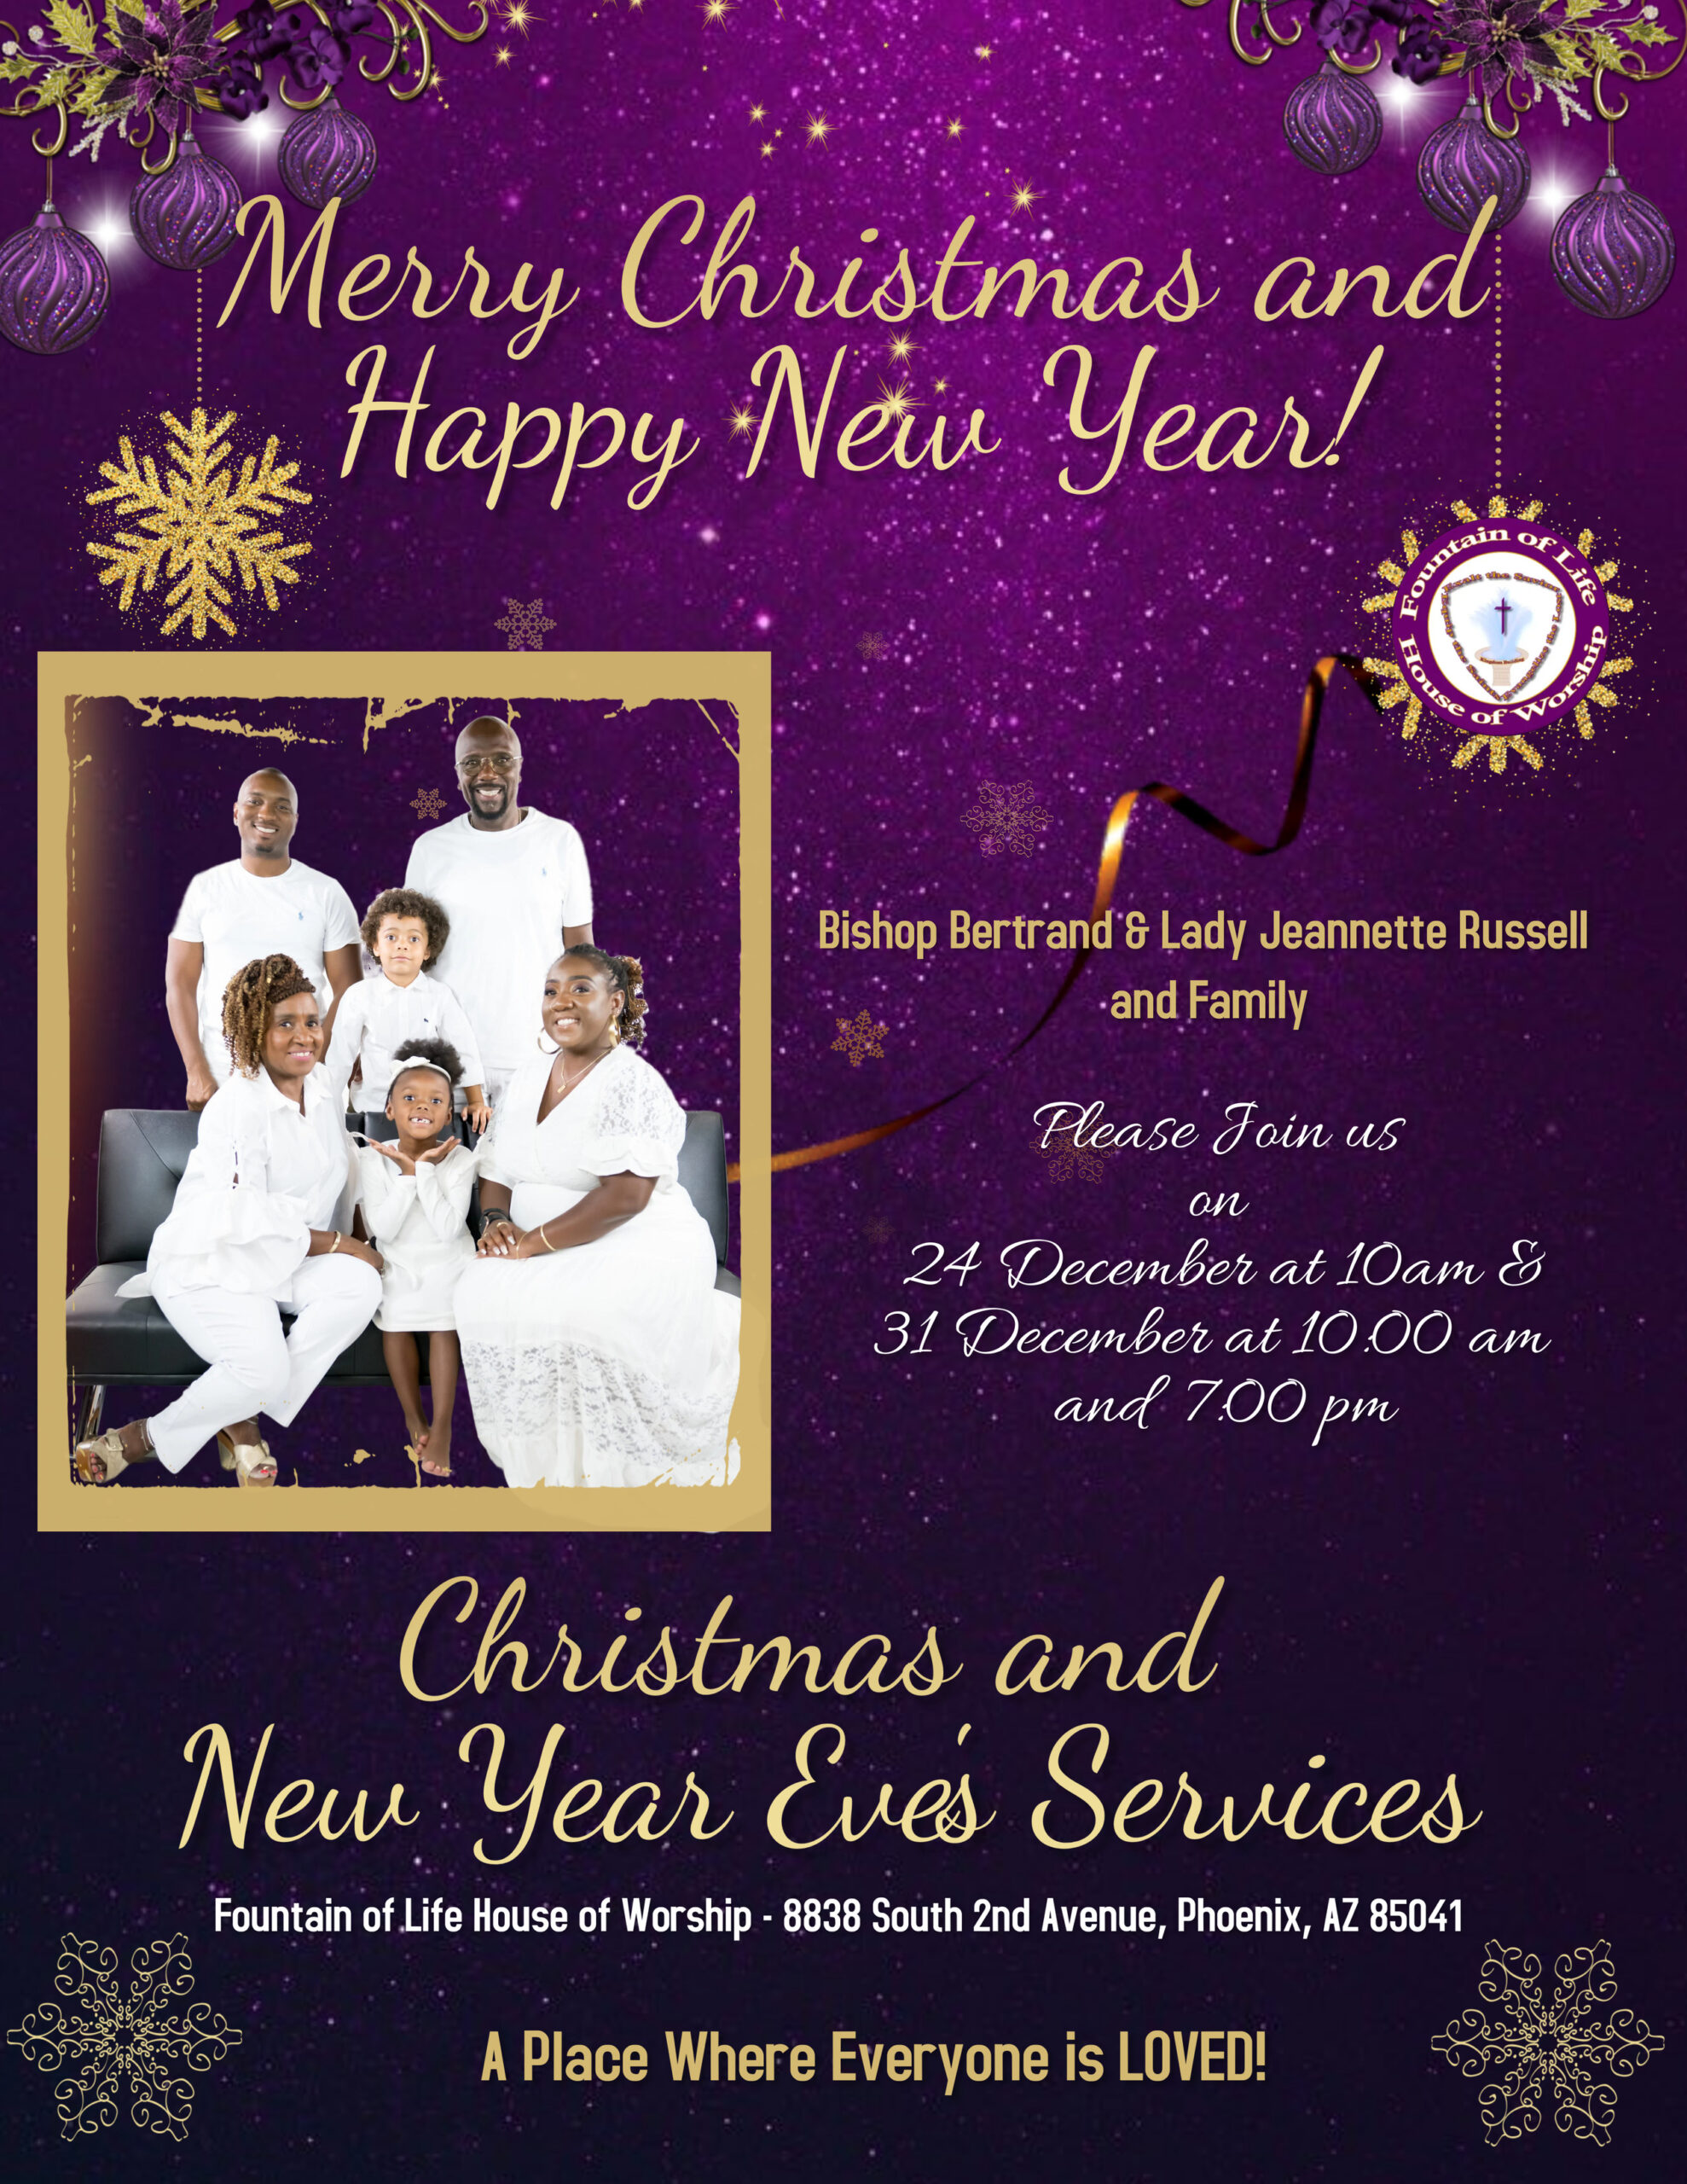 Christmas and New Years Services - Dec. 24 and Dec. 31